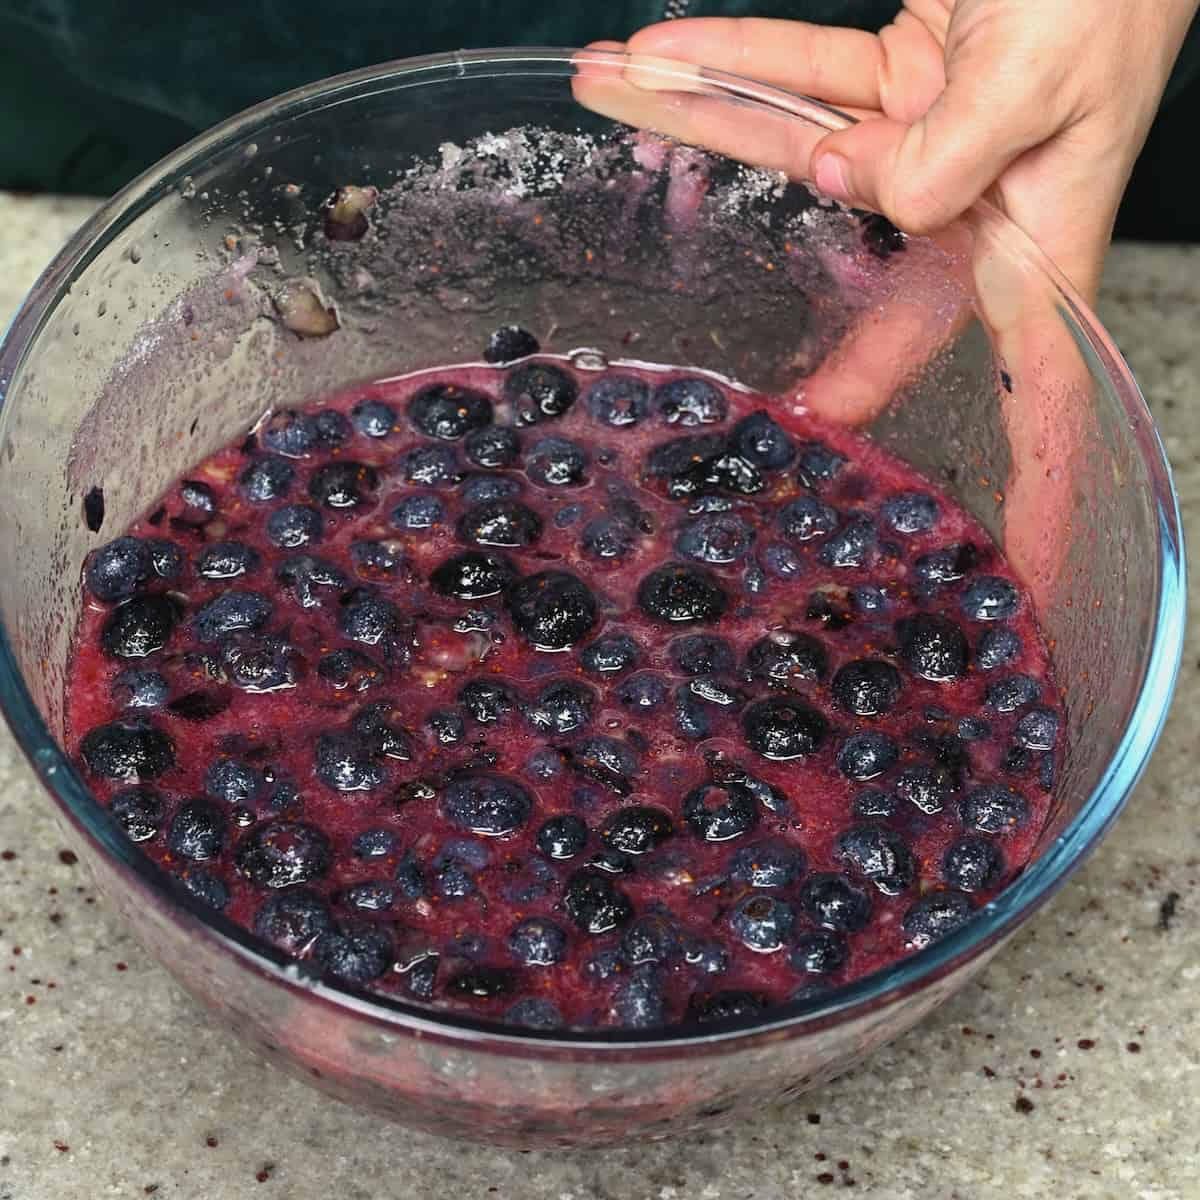 Blueberries mixed with sugar and lemon juice in a bowl